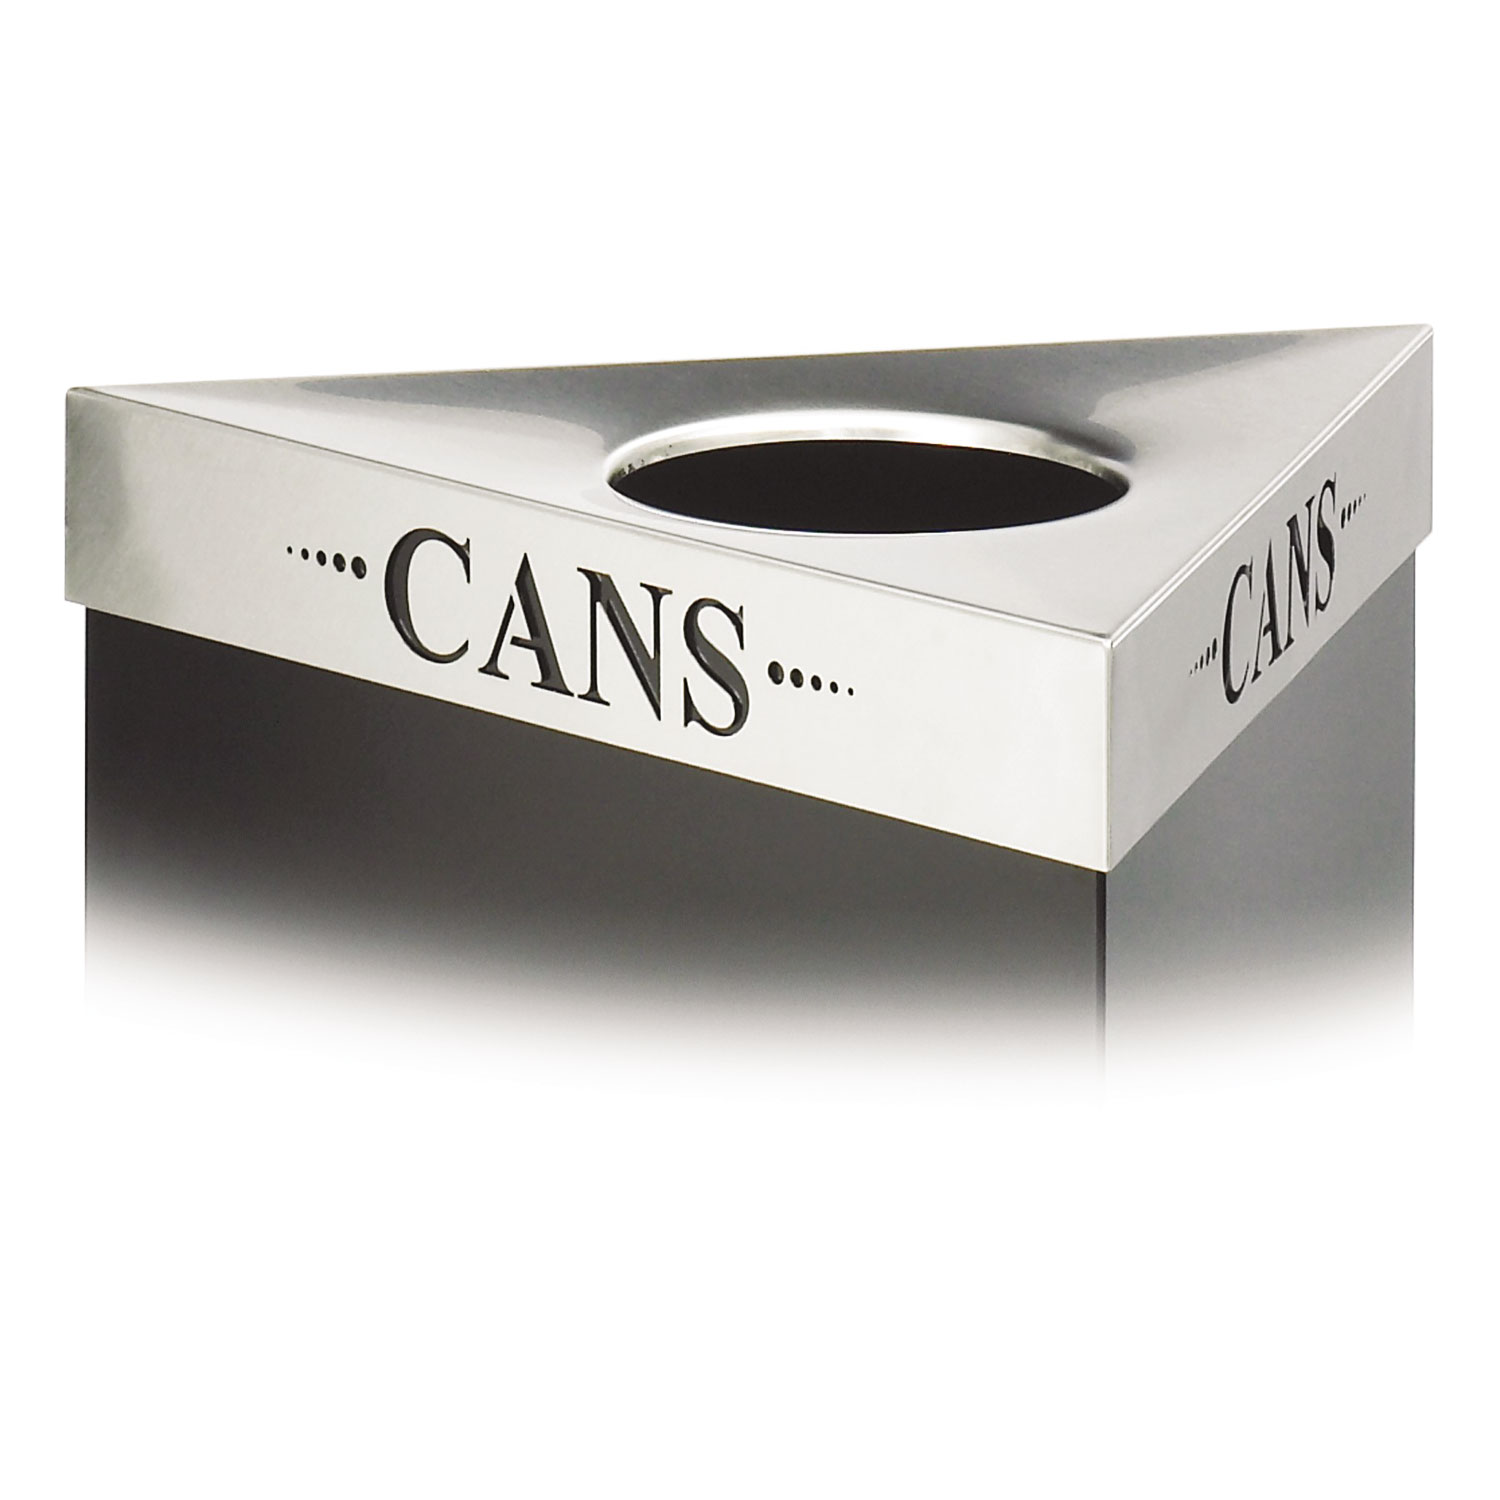 Trifecta Waste Receptacle Lid, Laser Cut CANS Inscription, Stainless Steel